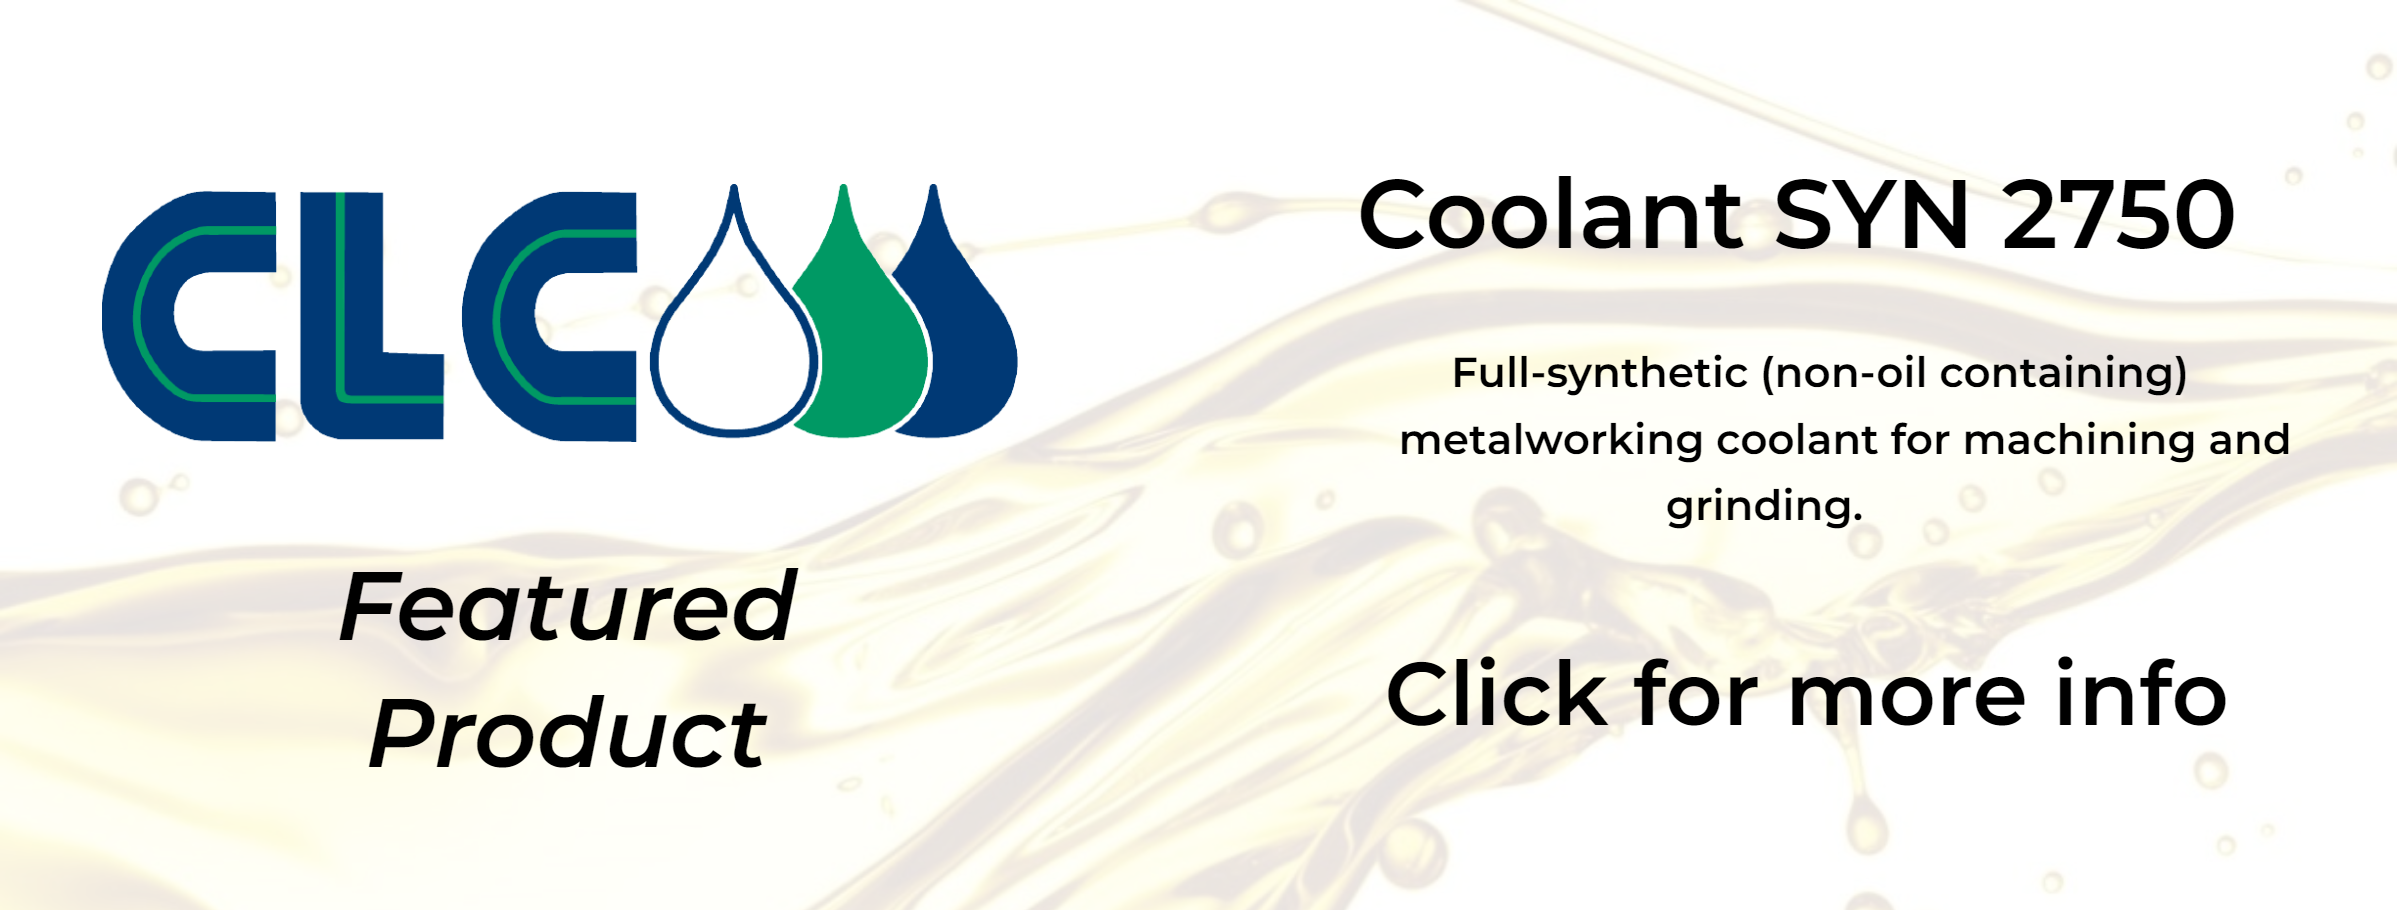 CLC Featured Product: Coolant SYN 2750. Full-synthetic (non-oil containing) metalworking coolant for machining and grinding. Click for more info.